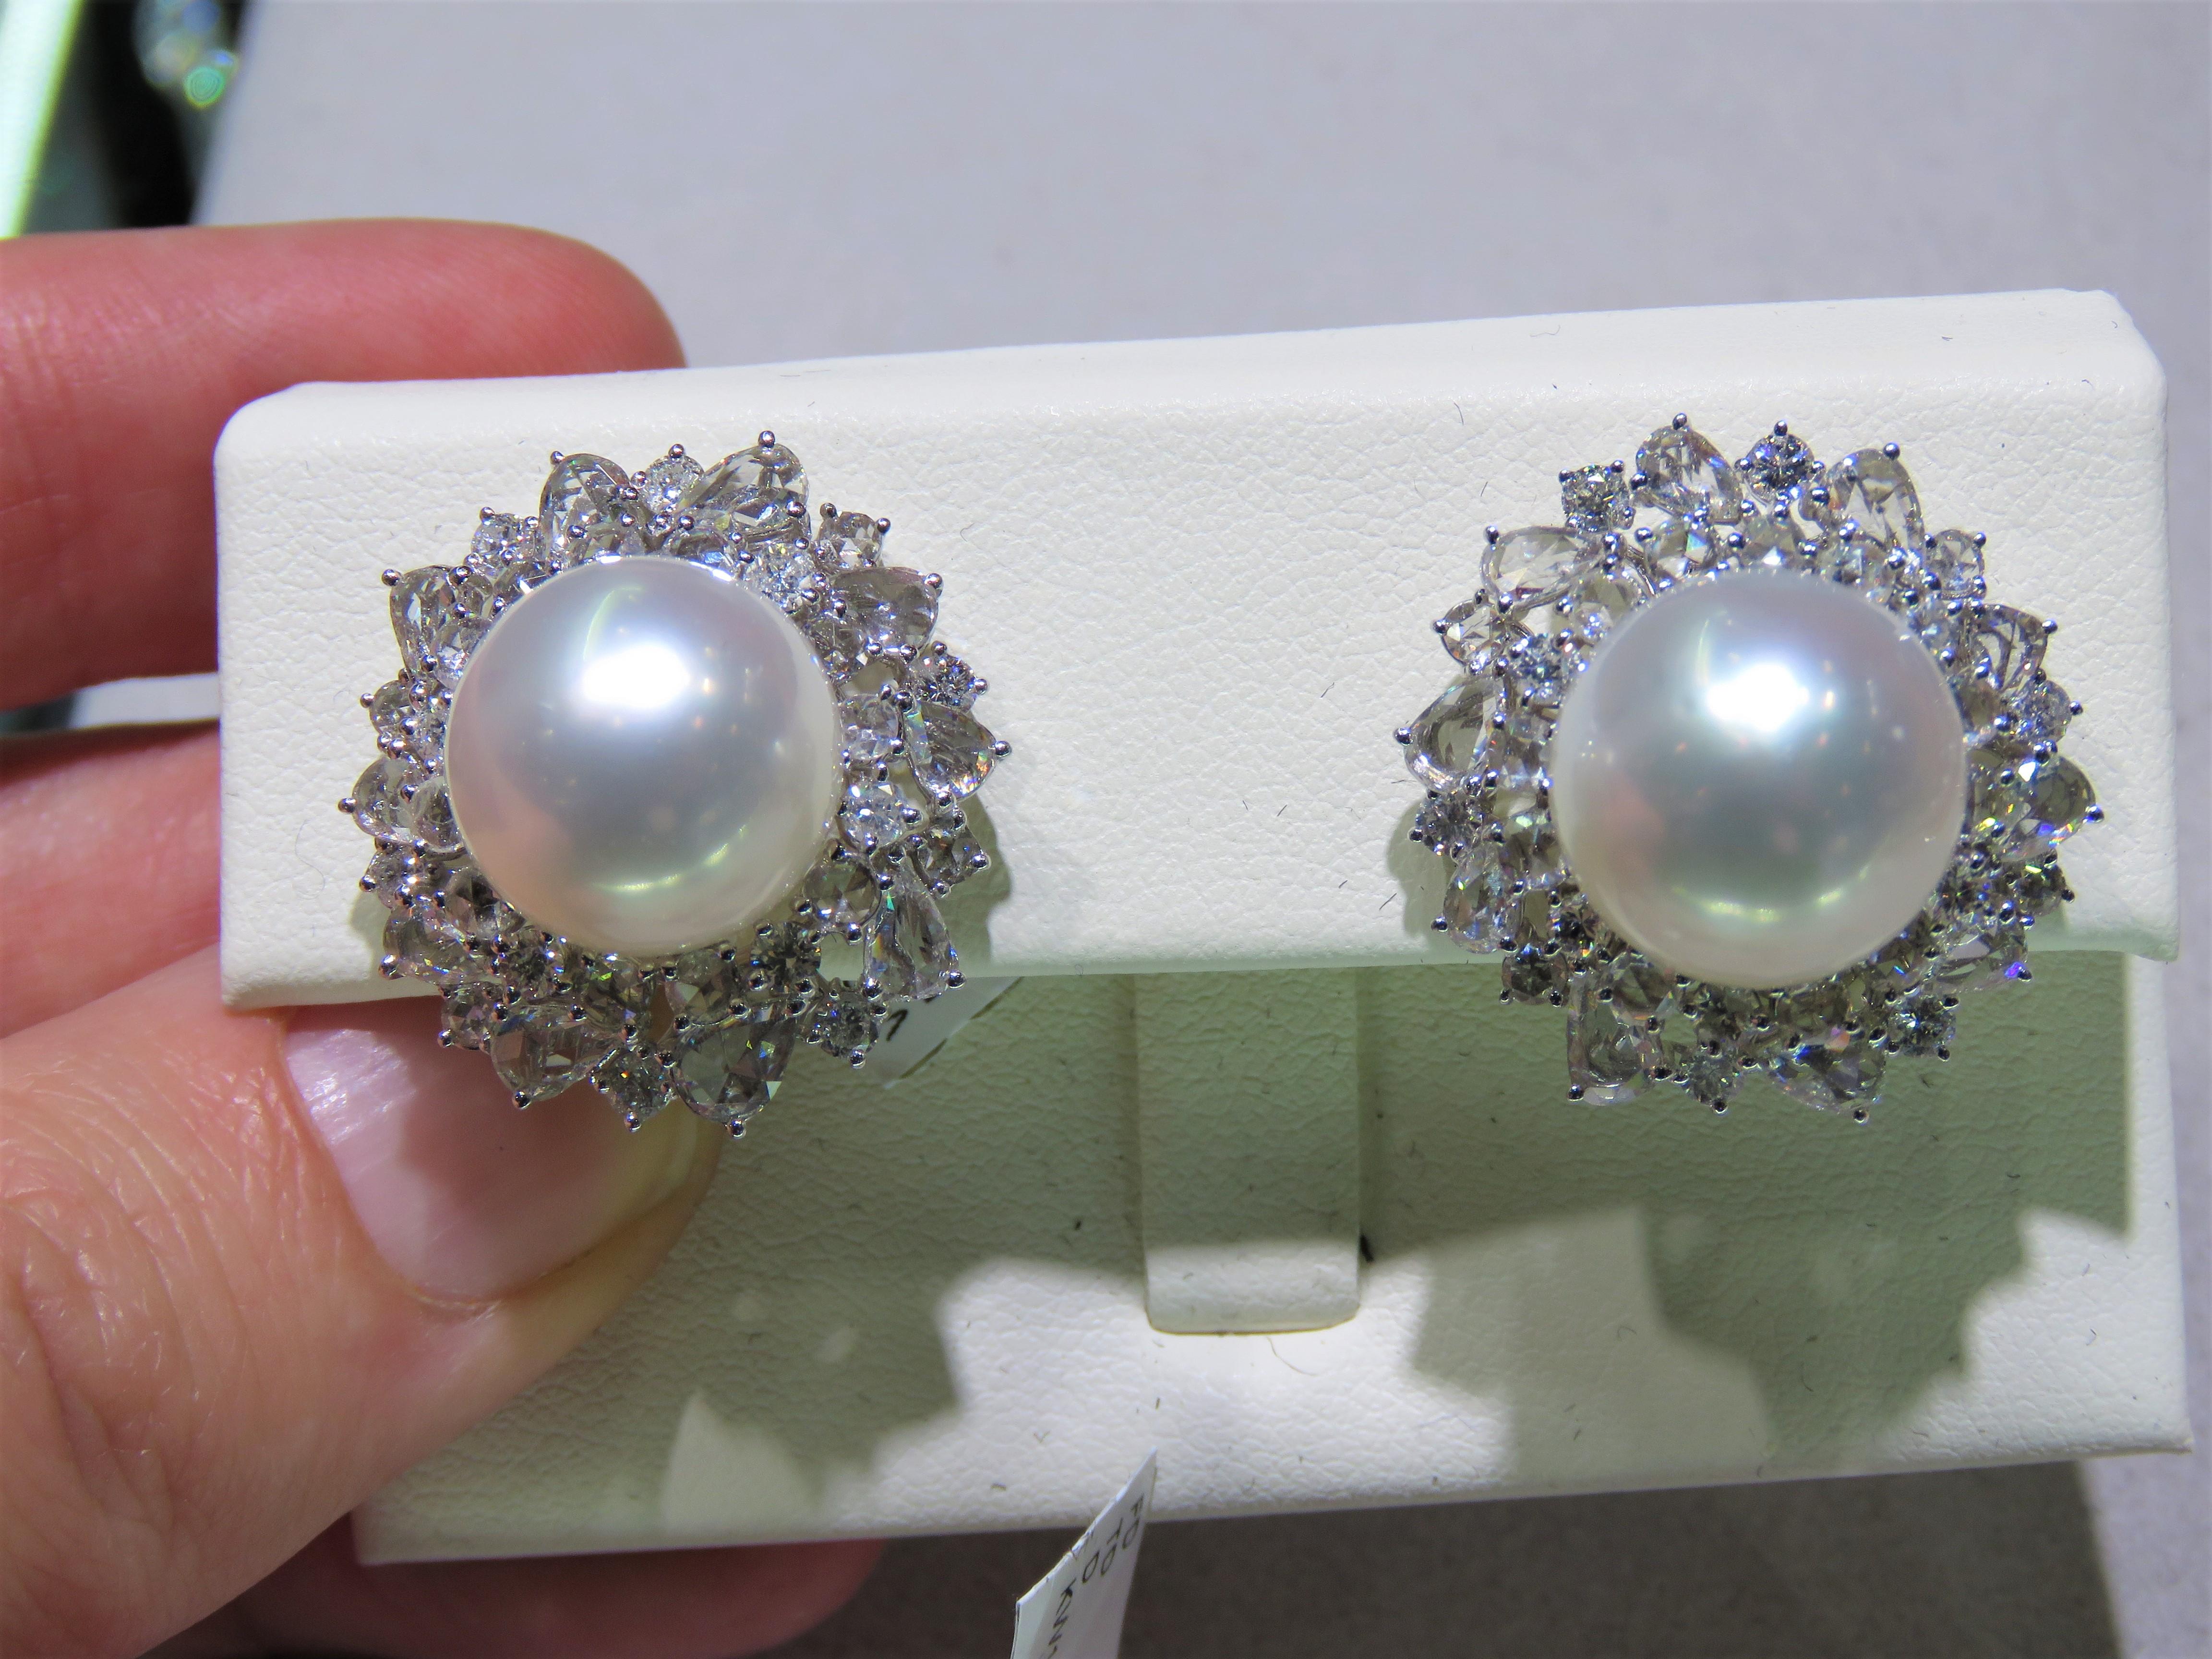 The Following Item we are offering are these Extremely Rare Beautiful 18KT Gold Fine Large Fancy South Sea White Pearl and Diamond Earrings. Each Earring features Gorgeous Glittering Diamonds adorned by a Magnificent Fine Fancy Large South Sea